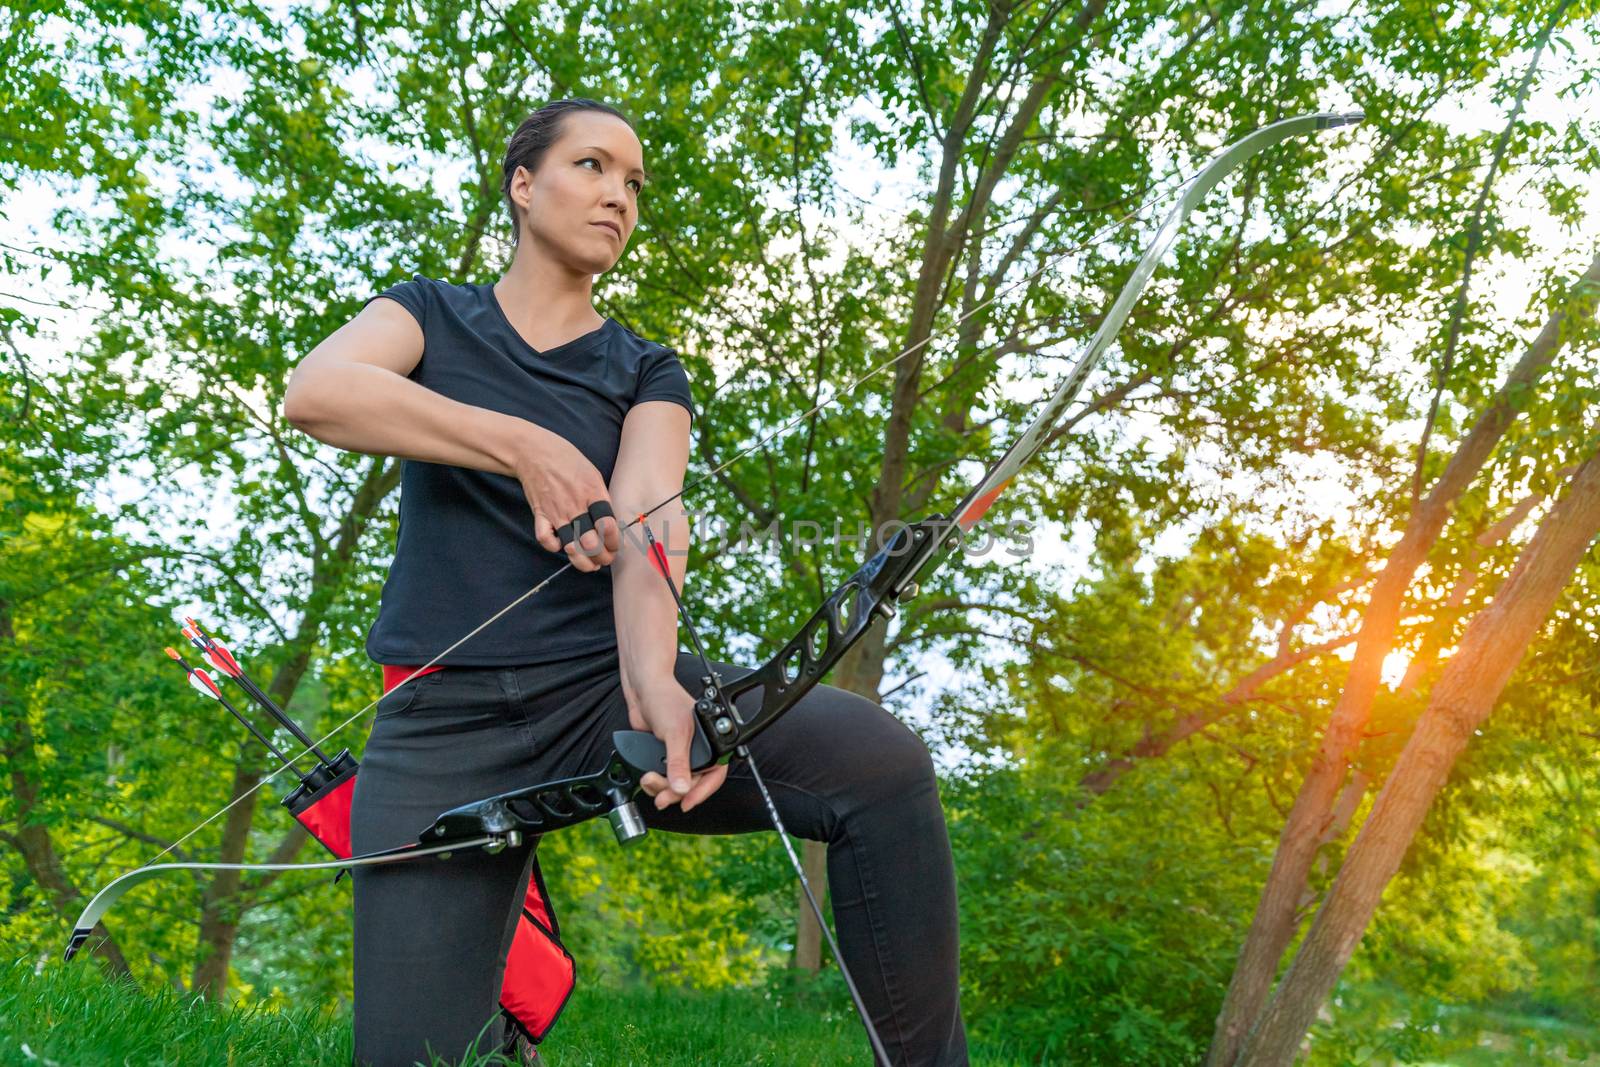 arrow shooting from a bow in nature, sport archery.